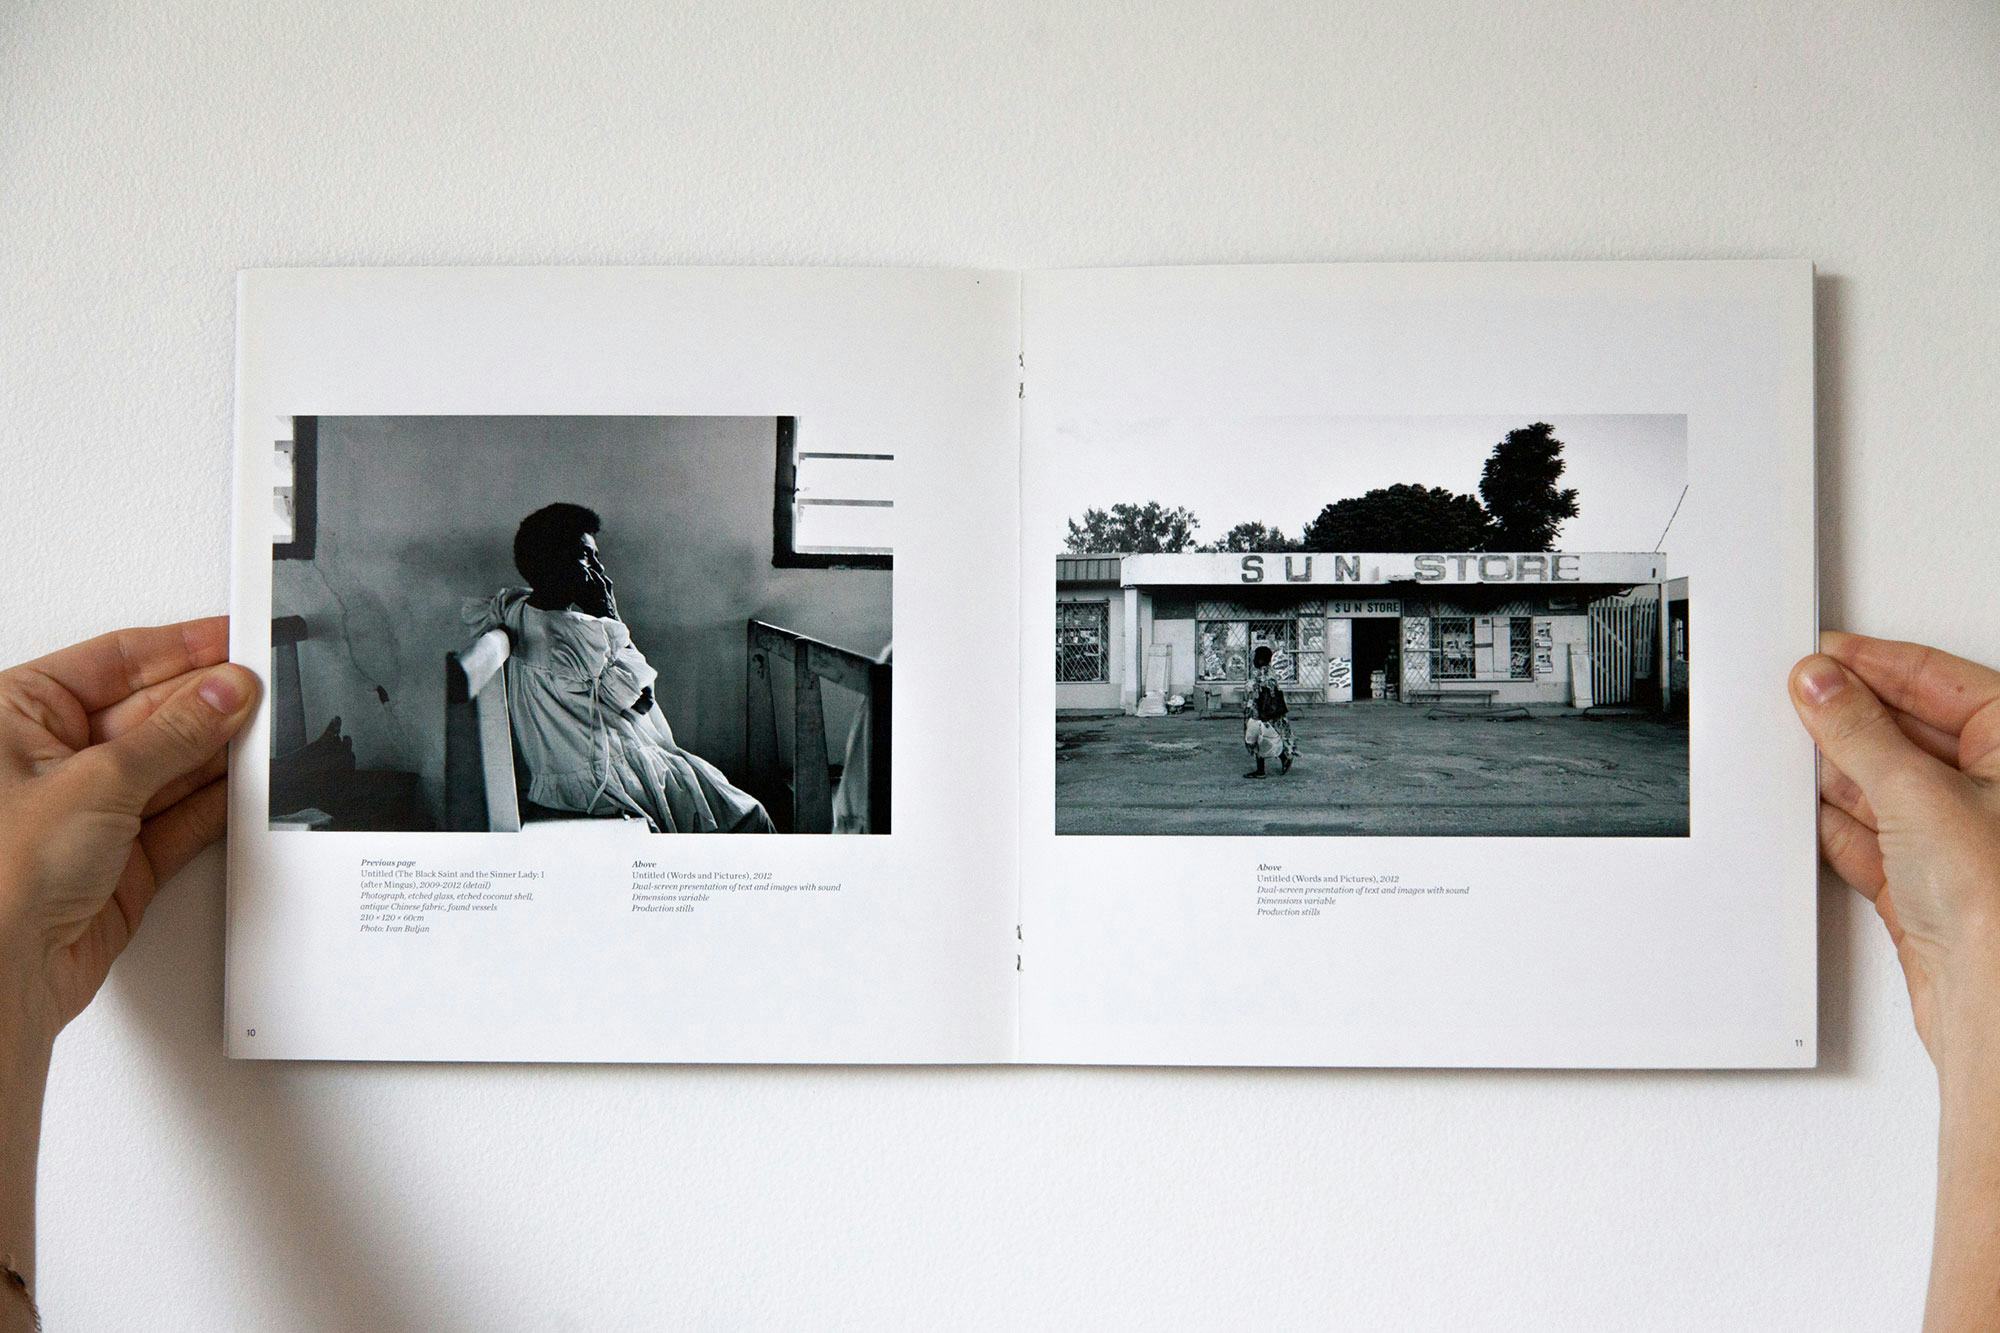 Spread from 7 Points exhibition catalogue